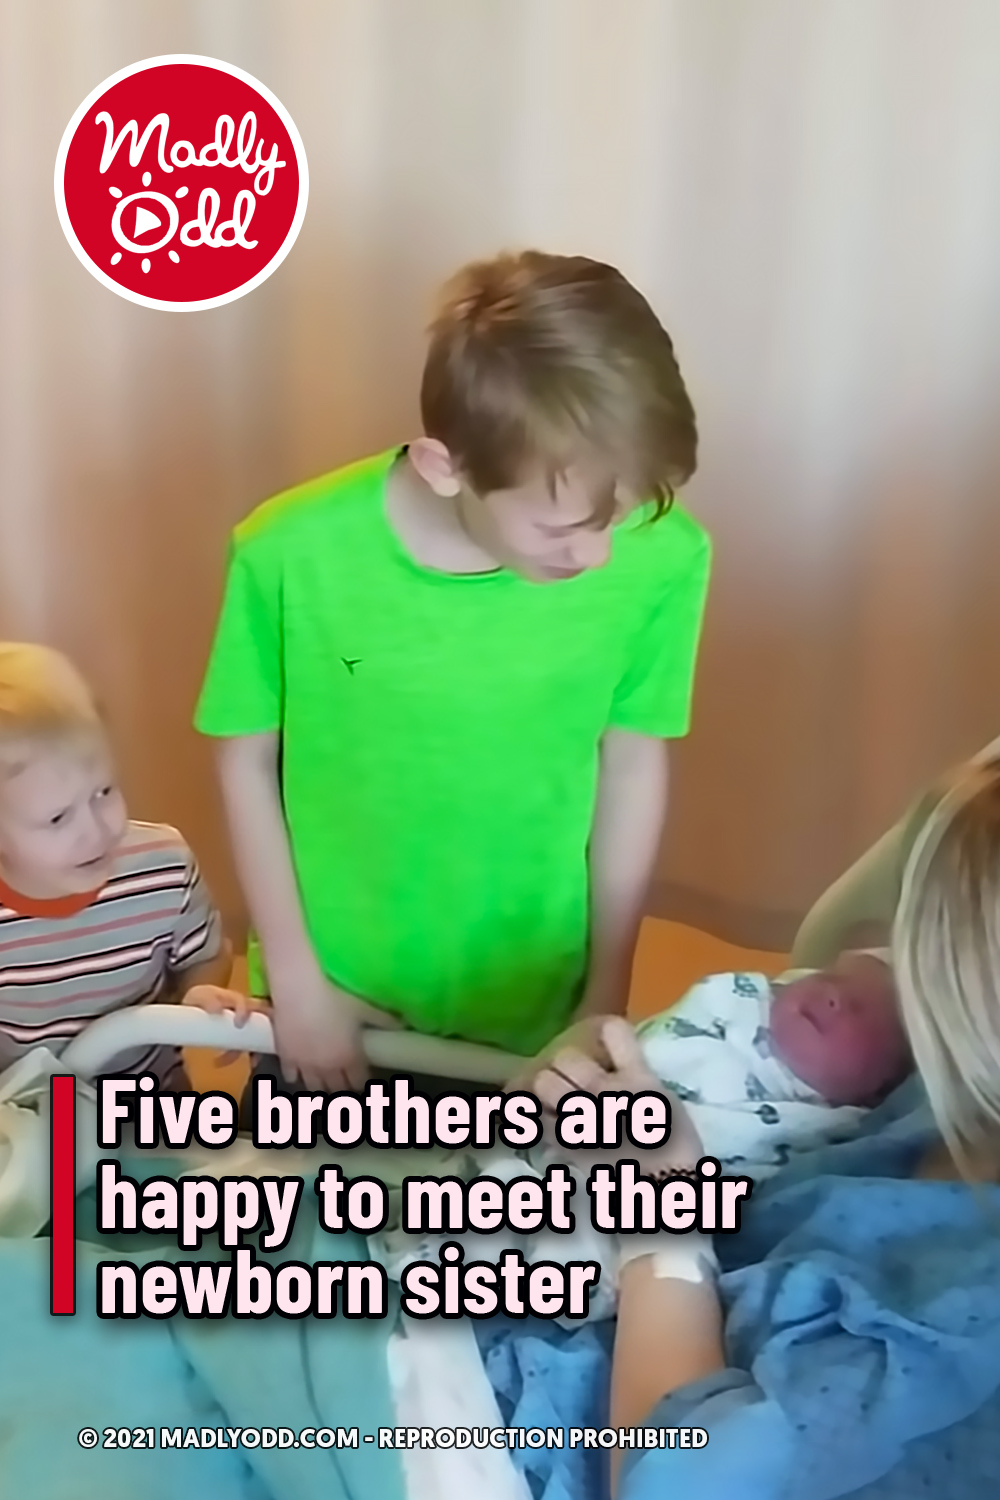 Five brothers are happy to meet their newborn sister